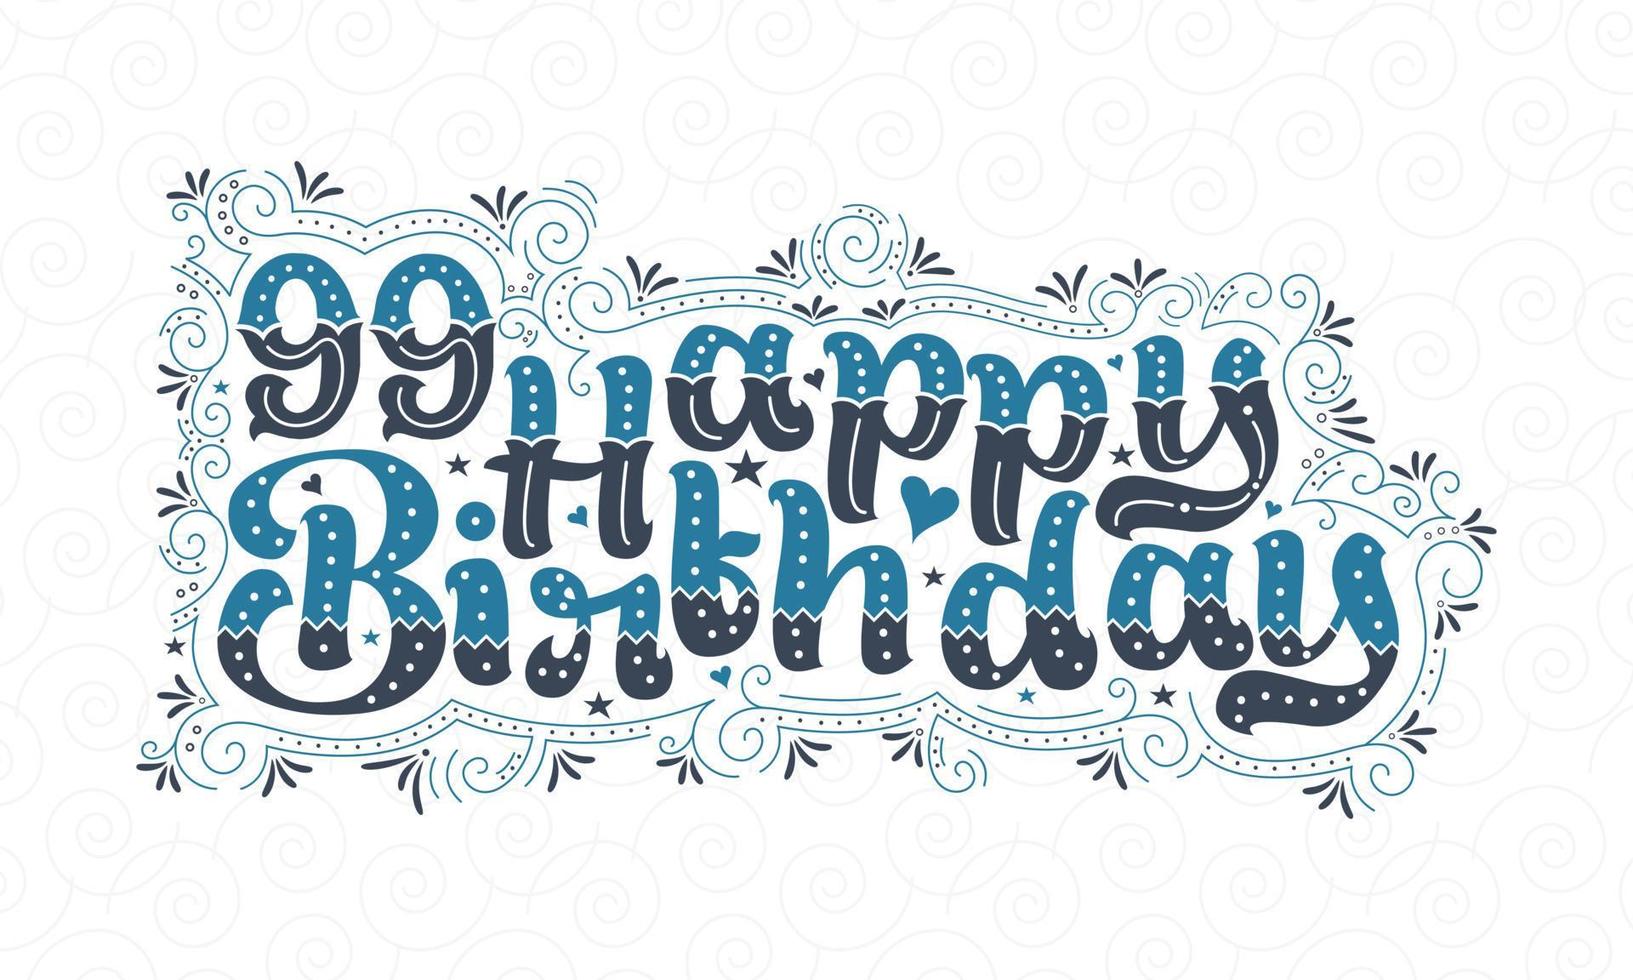 99th Happy Birthday lettering, 99 years Birthday beautiful typography design with blue and black dots, lines, and leaves. vector